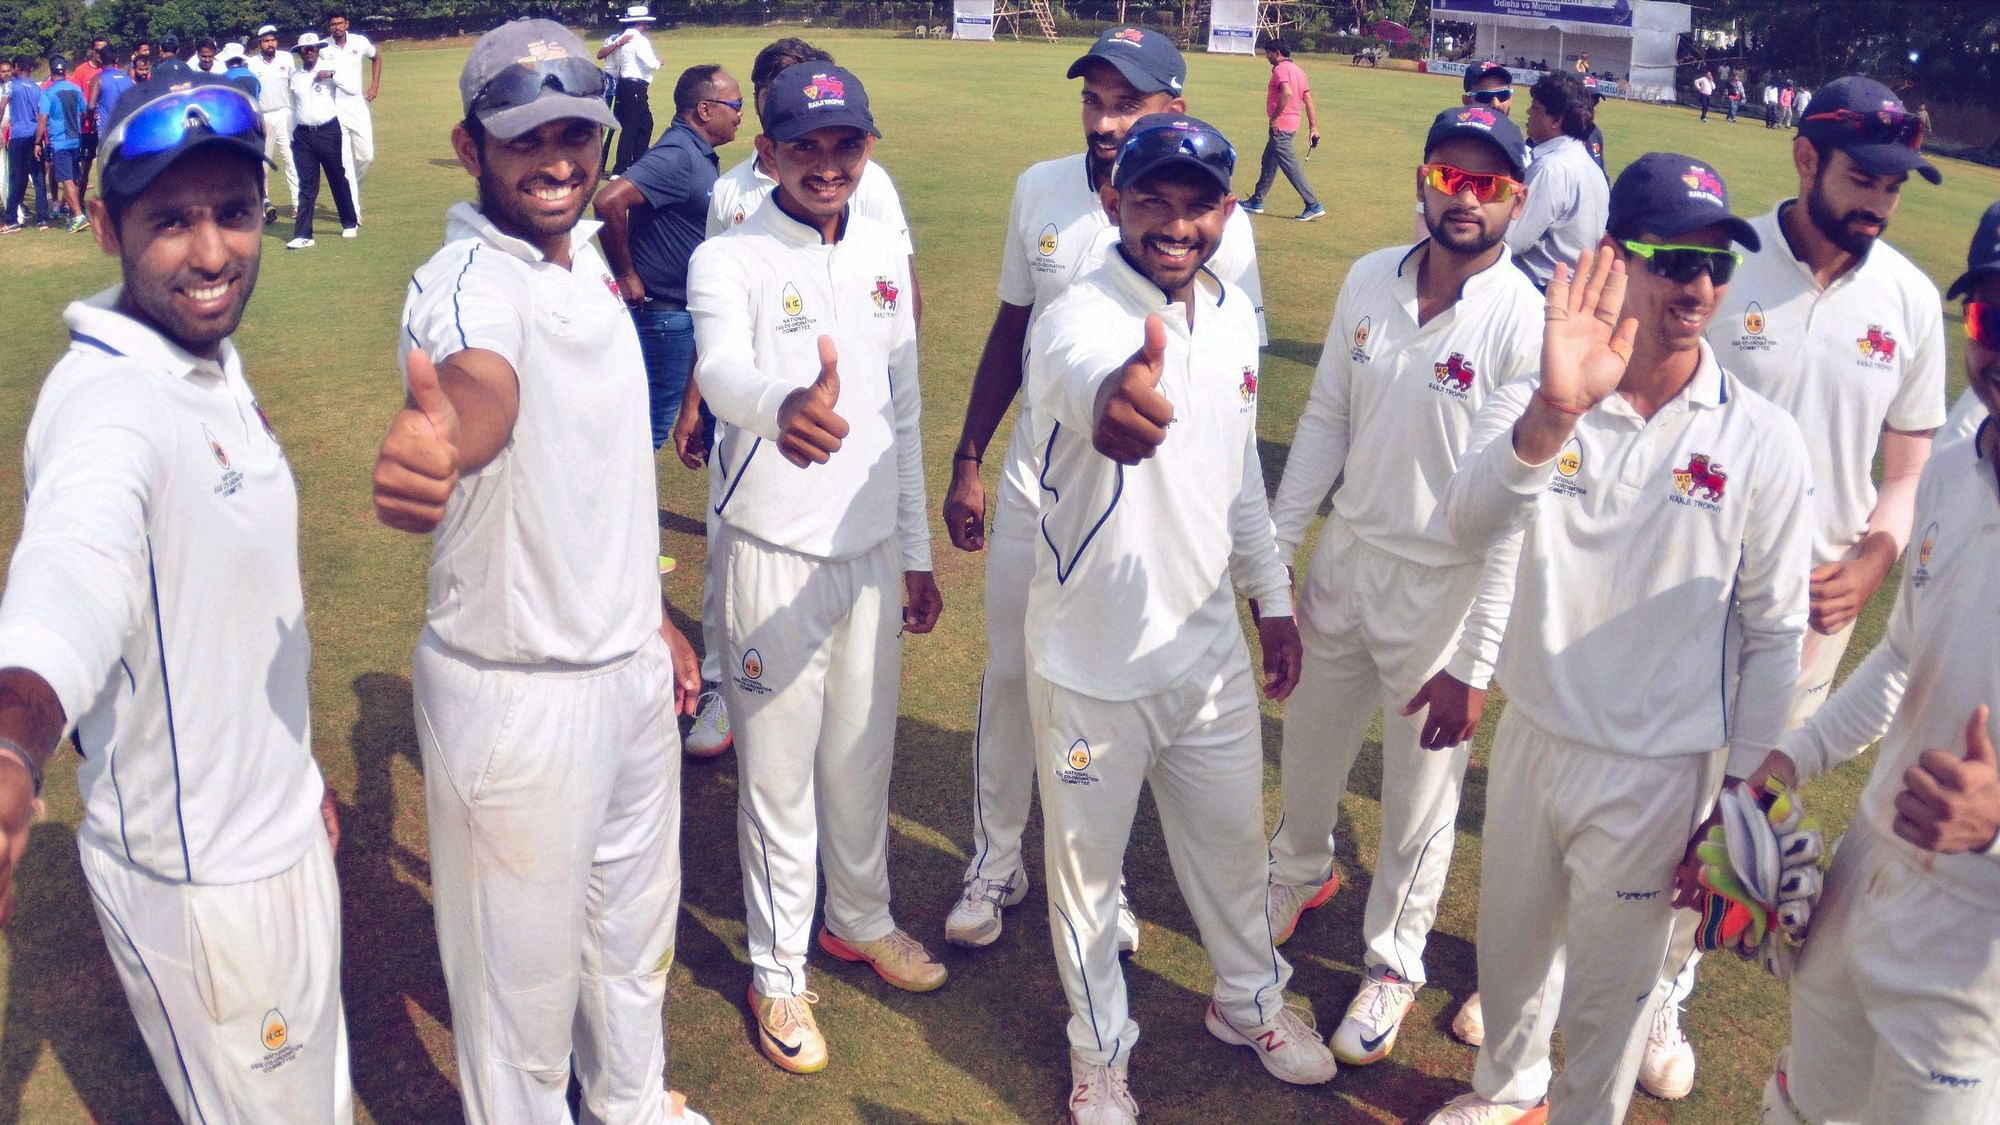 Mumbai’s Ranji players celebrate their sole win of the previous season, where they failed to make it past the group stage.